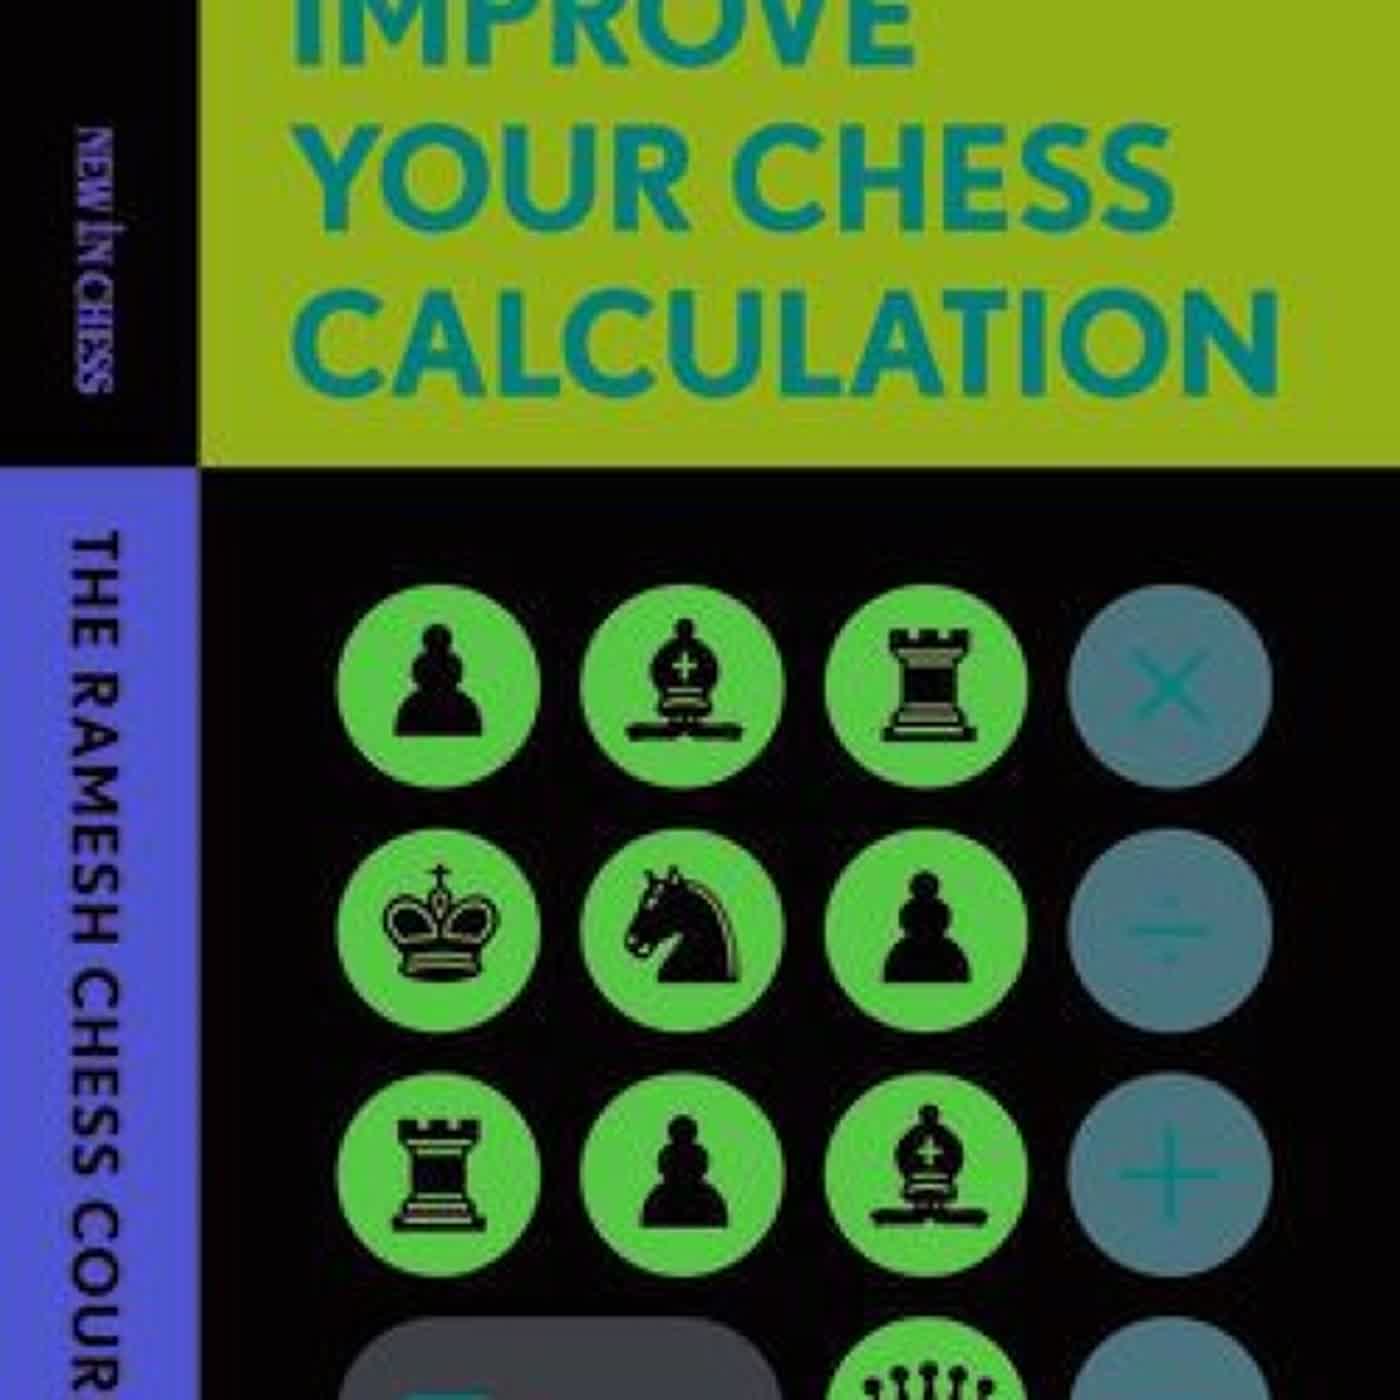 Read [pdf]> Improve Your Chess Calculation: The Ramesh Chess Course by Ramesh RB